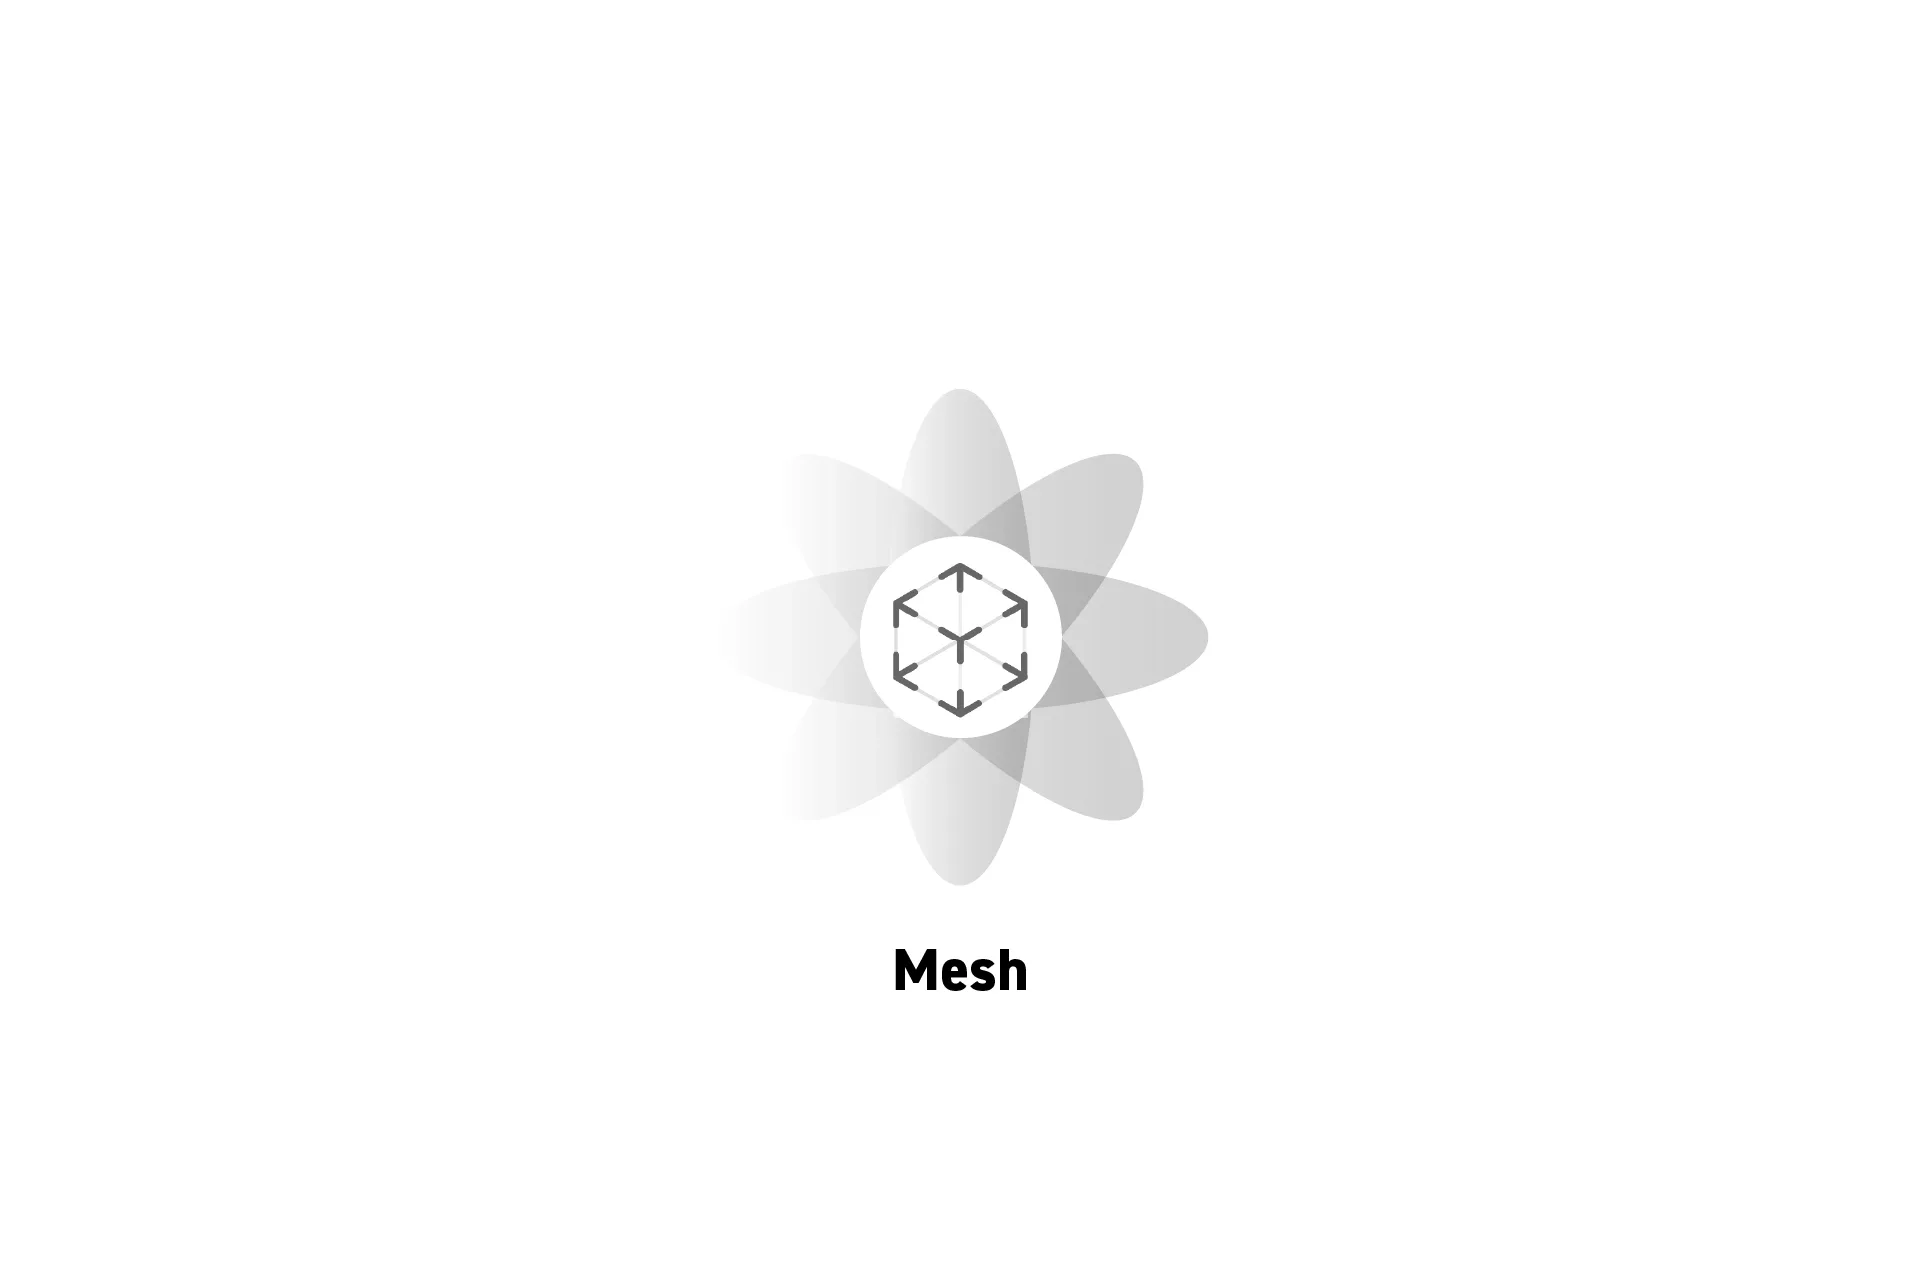 A flower that represents spatial computing with the text "Mesh" beneath it.